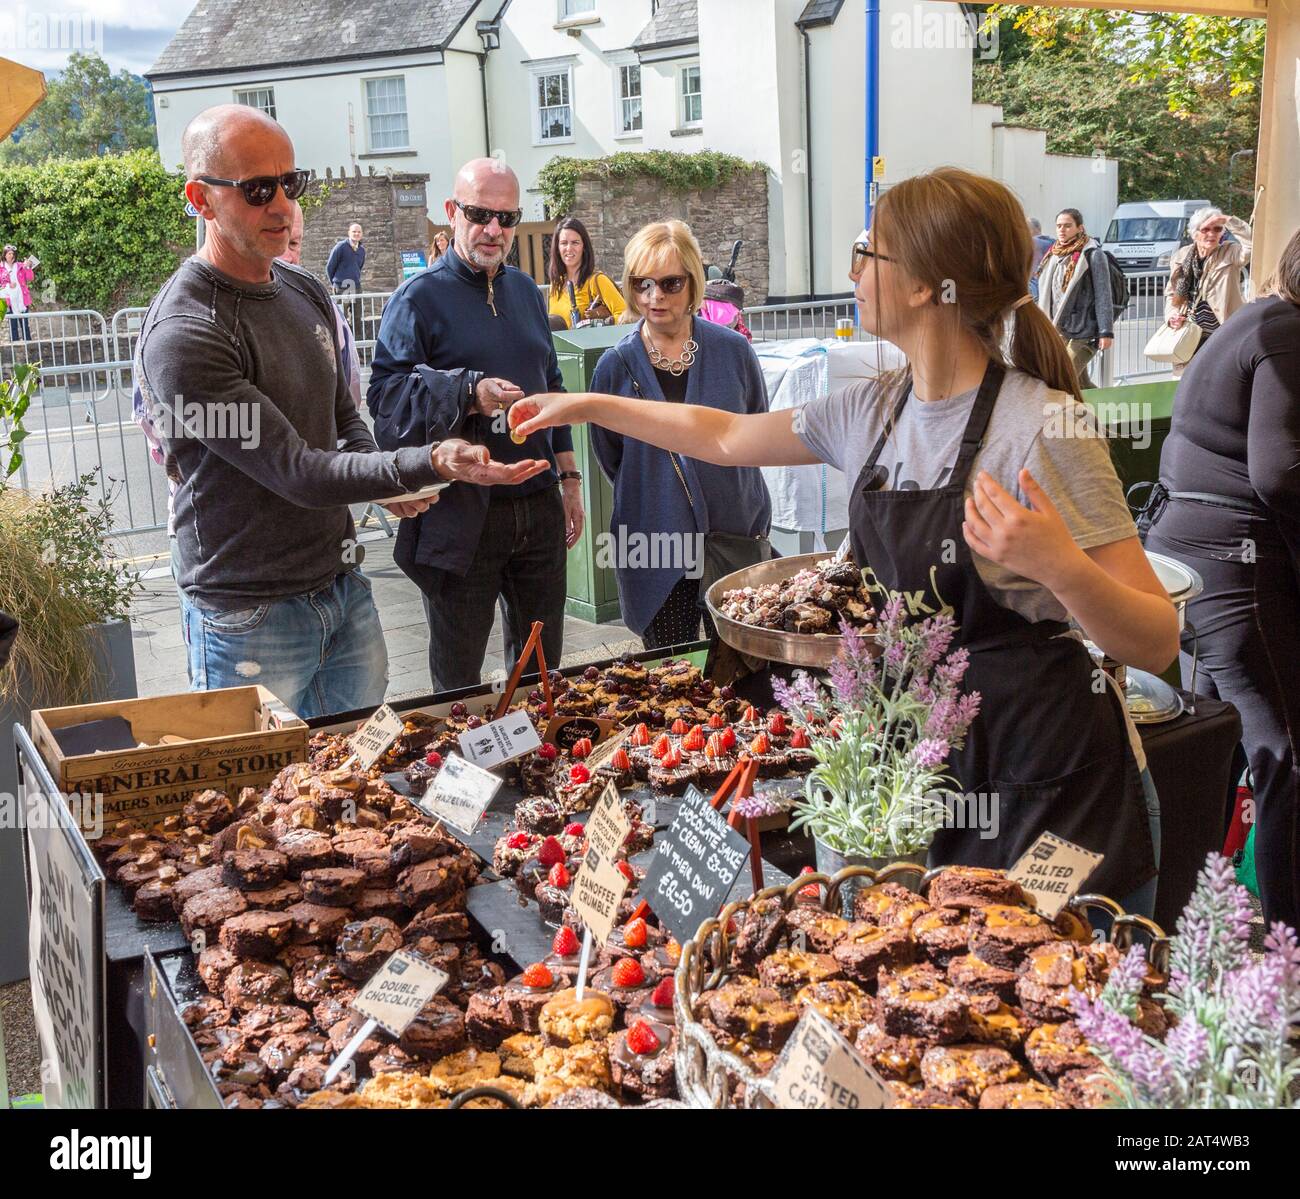 Buying brownies on stall at Abergavenny Food Festival, Wales, UK Stock Photo